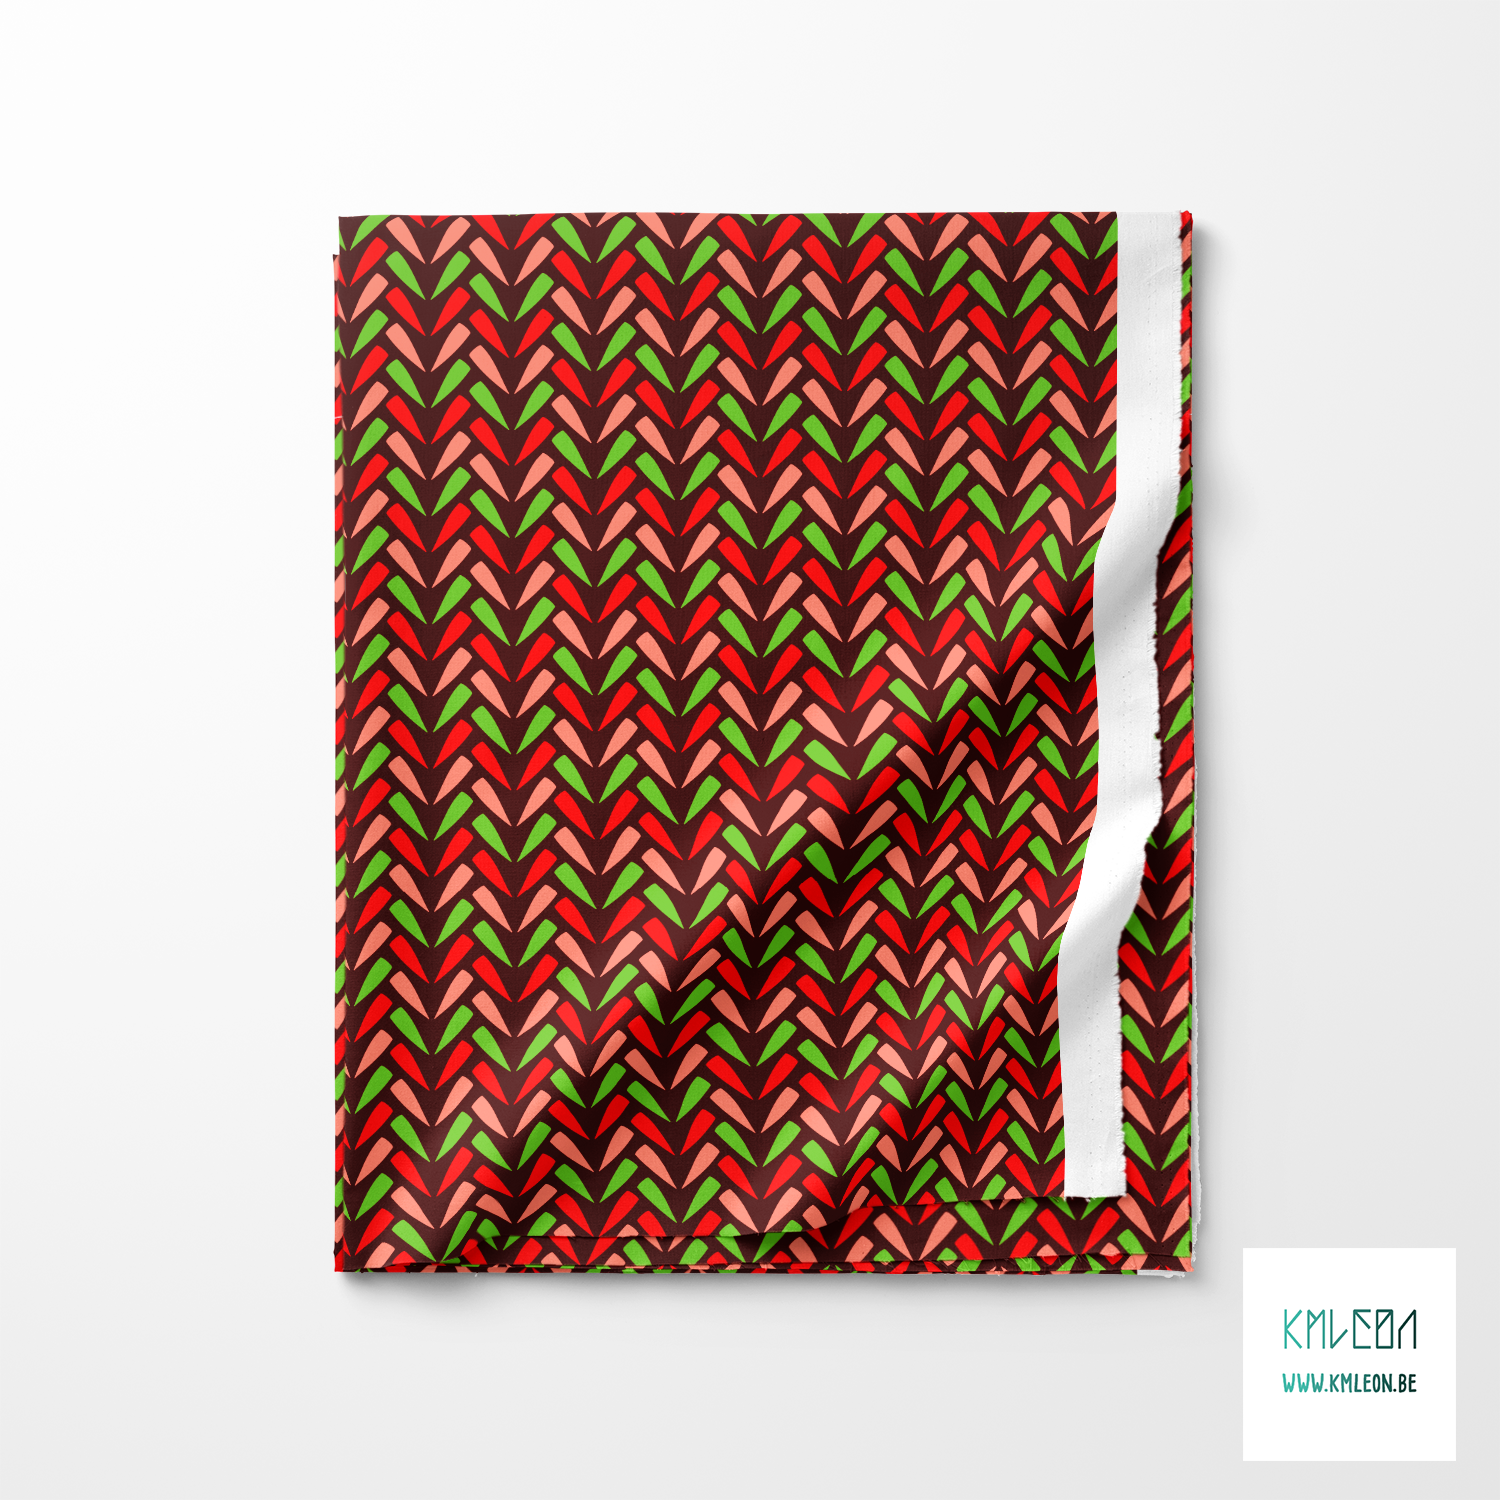 Pink, green and red chevron fabric